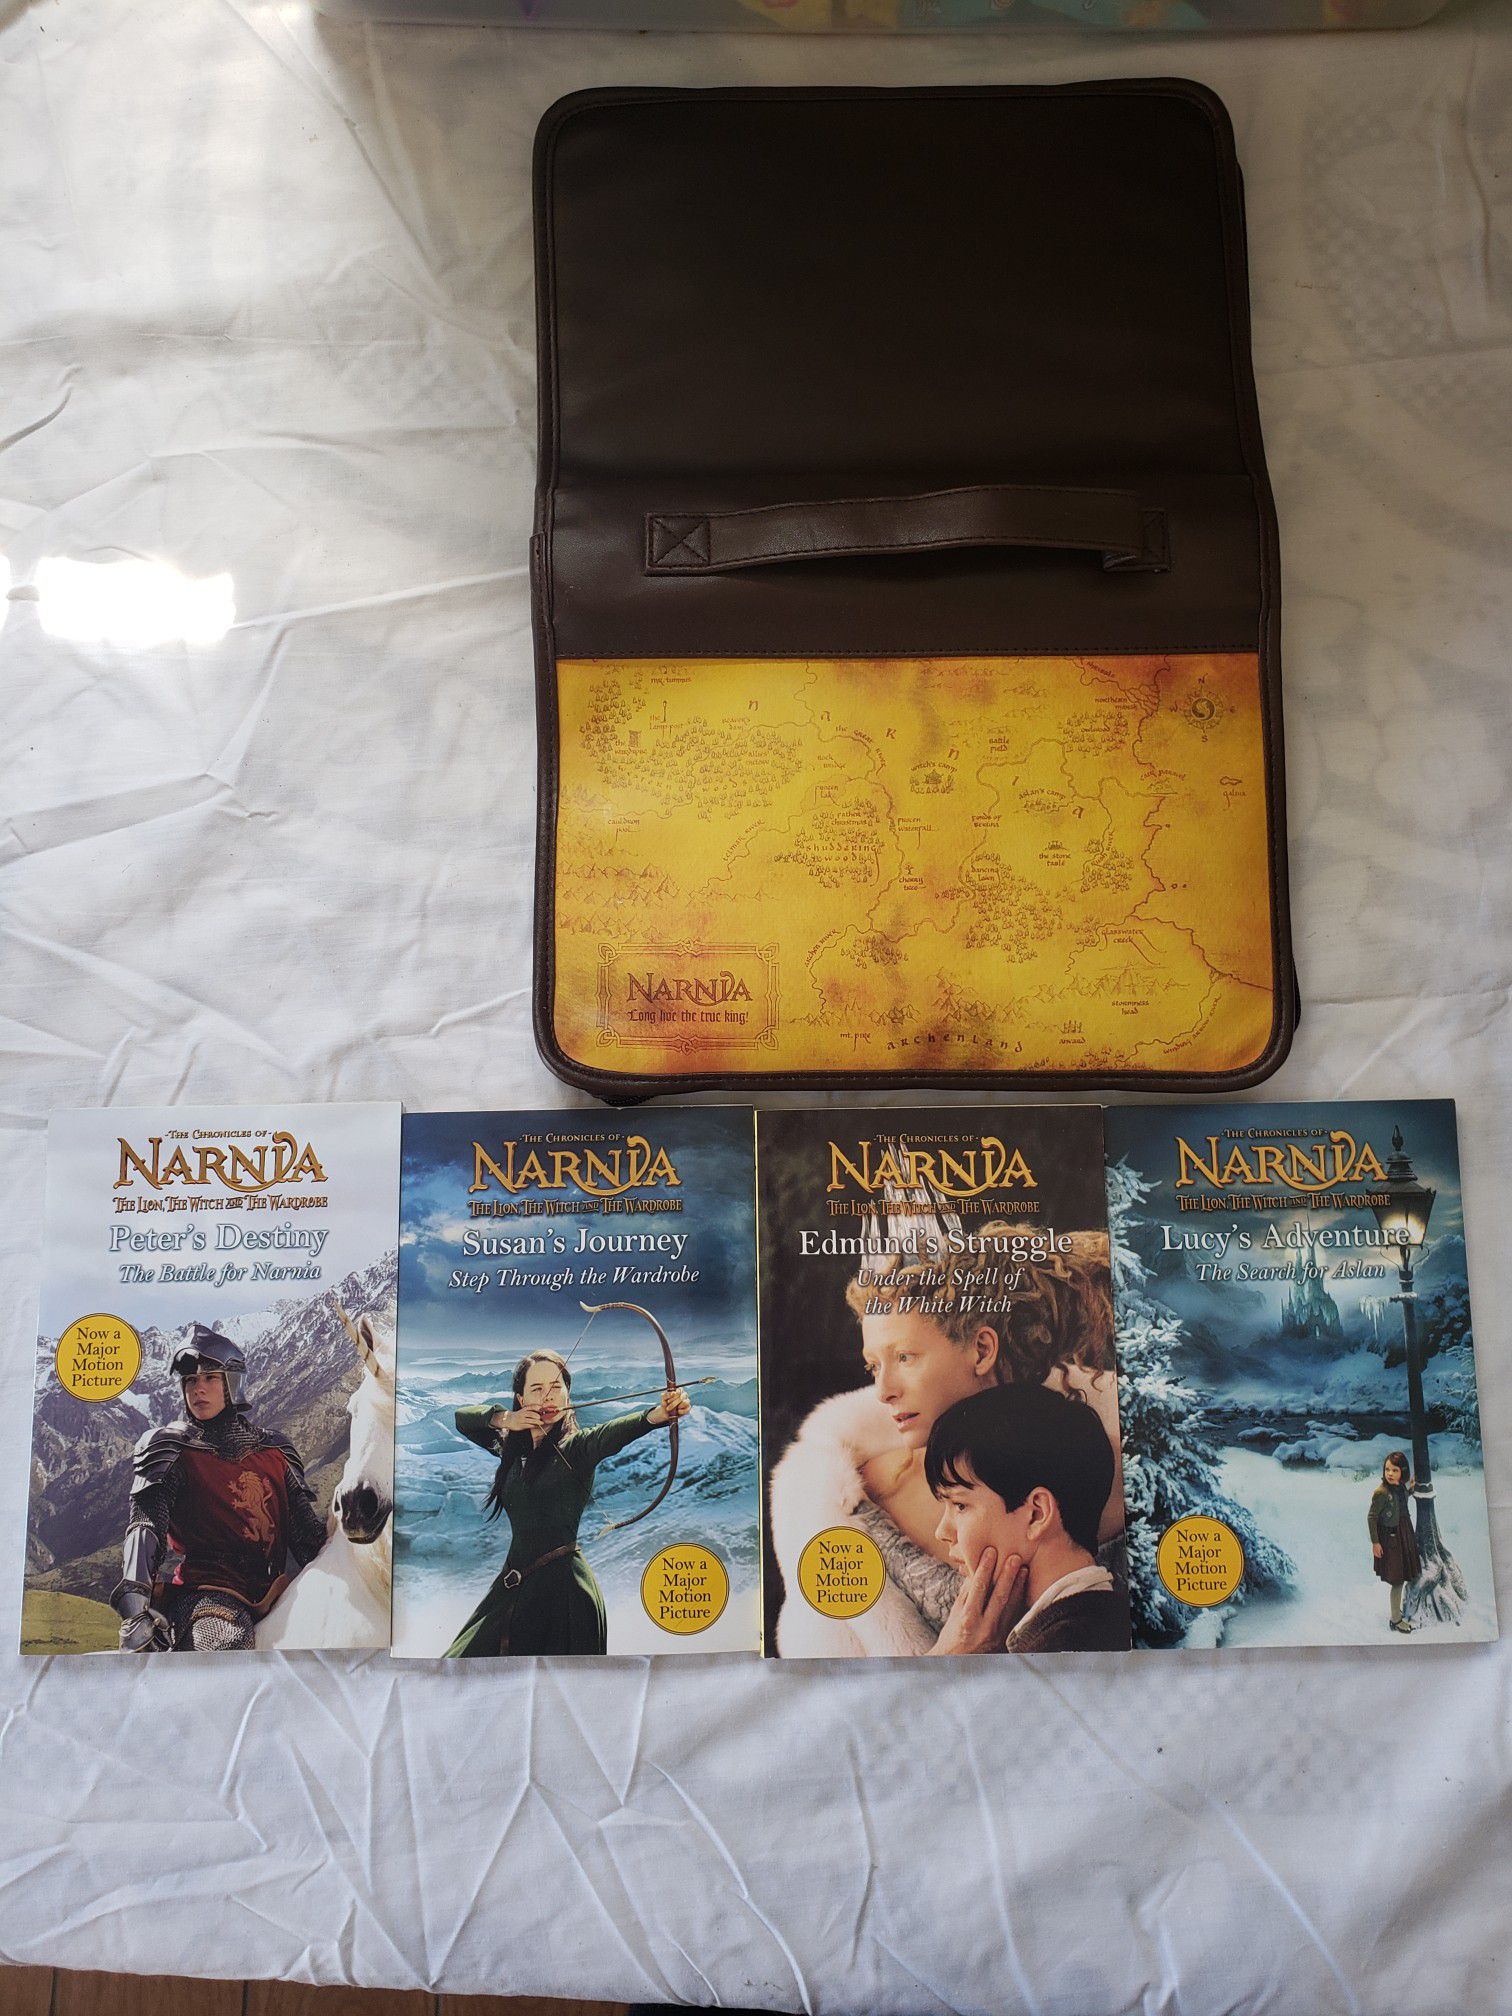 Narnia Book Set of the children